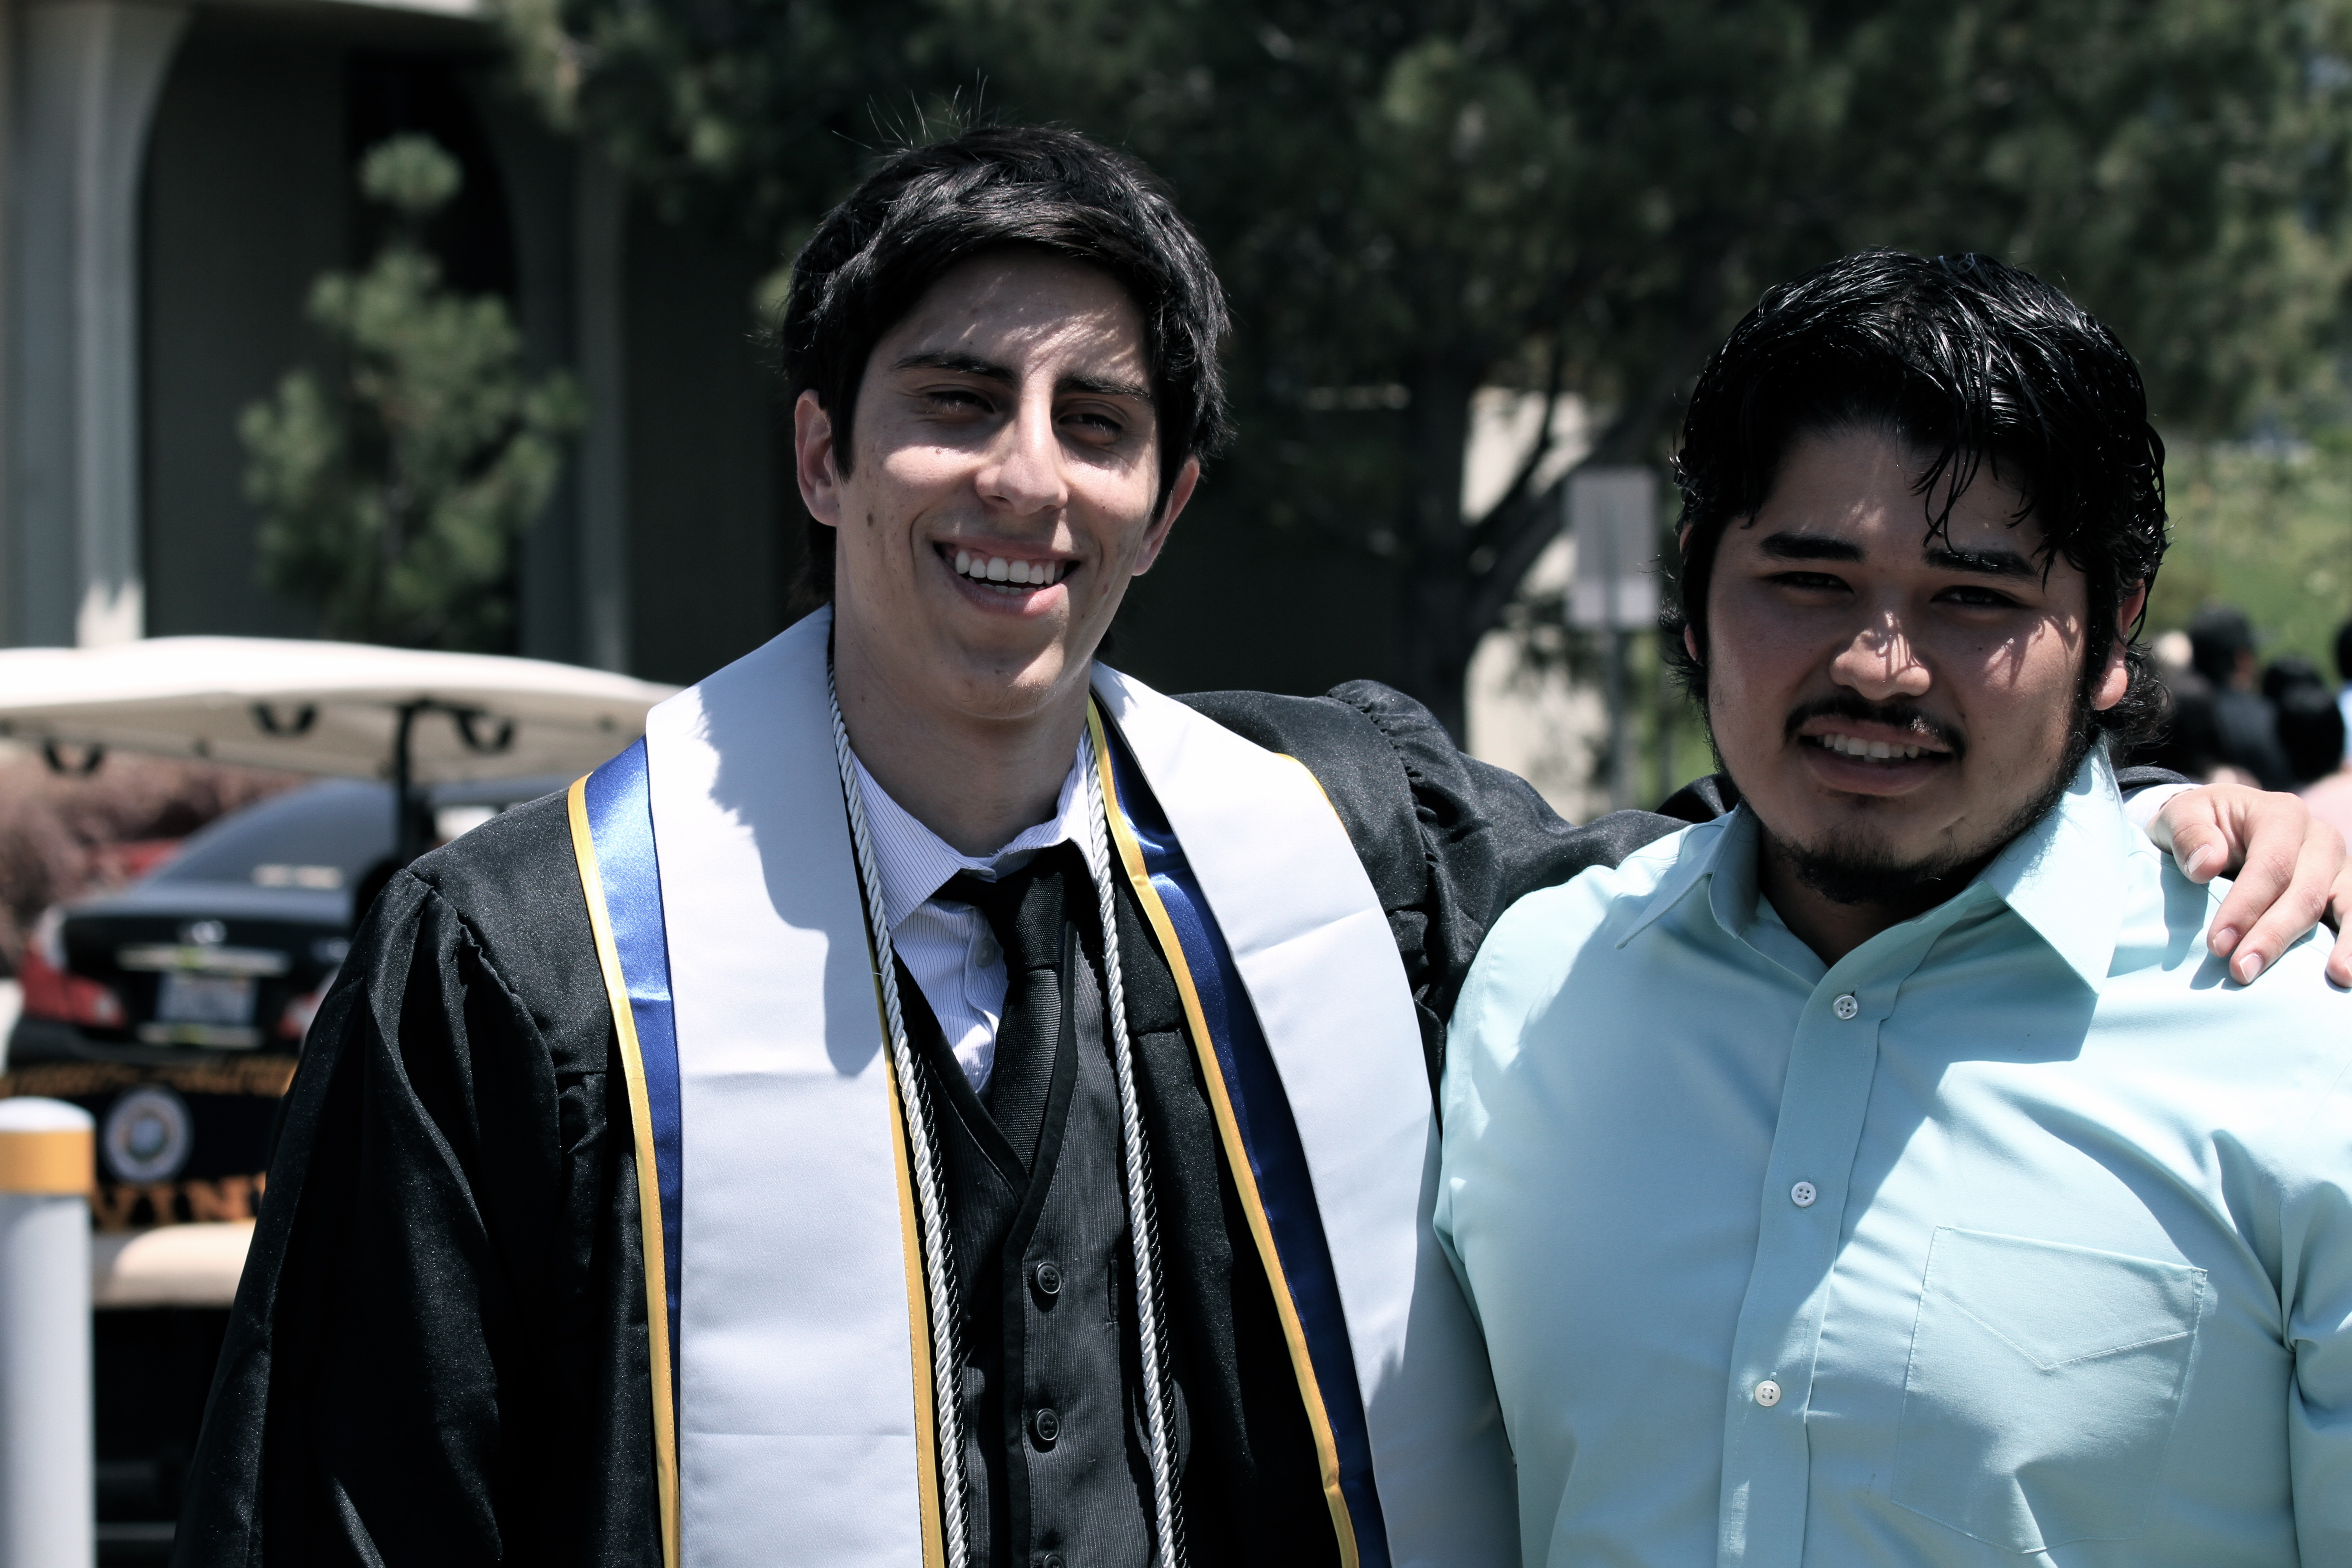 Addison Sandoval with Doroteo Equihua Jr. at the Forty Seventh Annual Commencement at the University of California Irvine 2012.